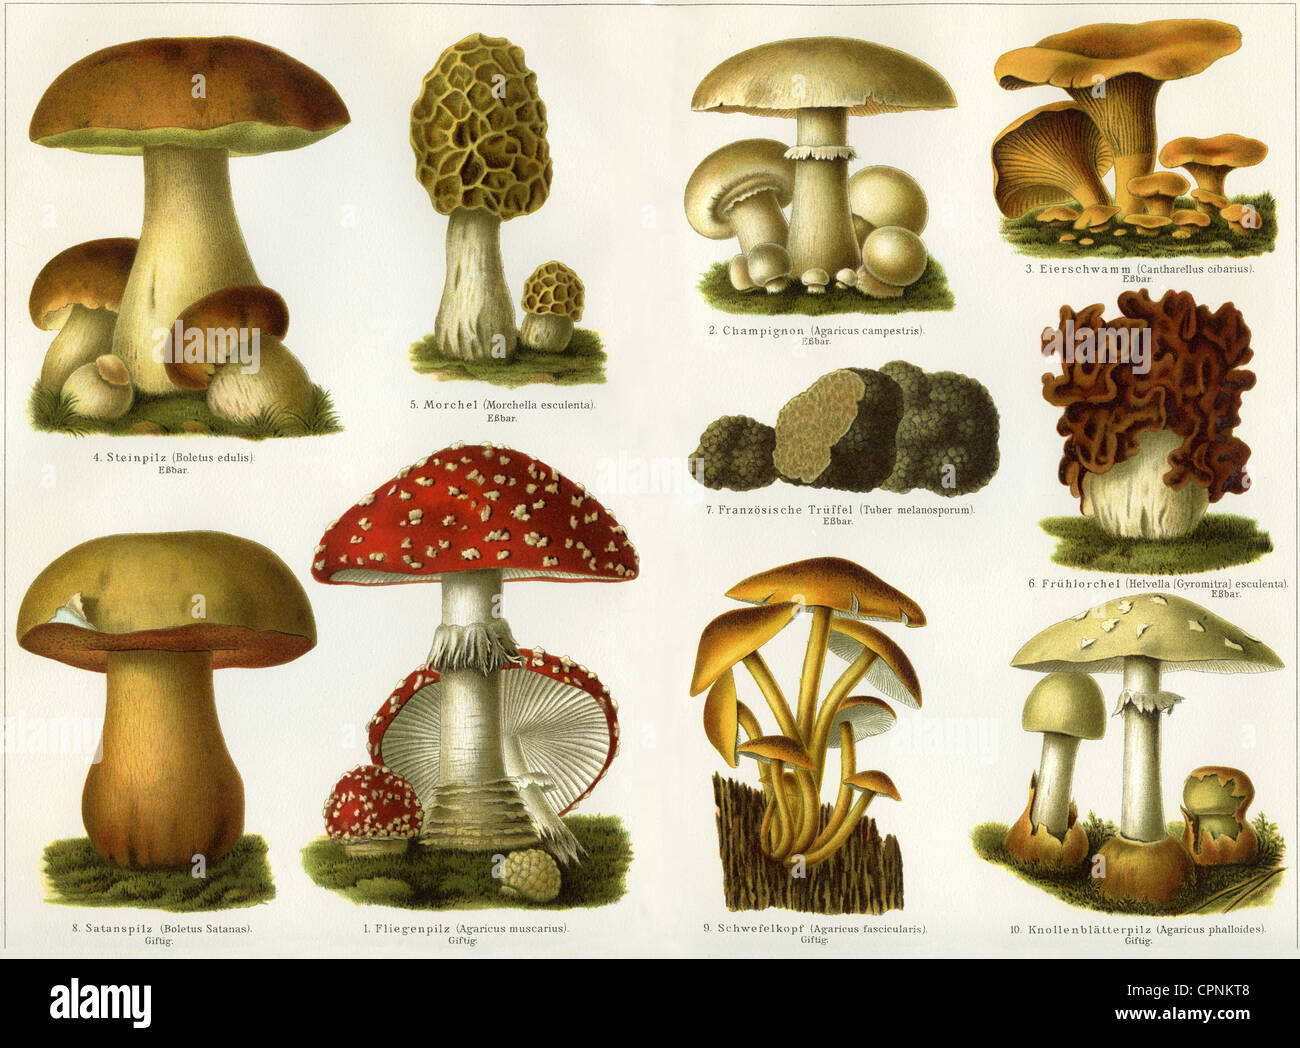 botany, mushrooms, synopsis, edible mushrooms: edible boletus, edible boletus, morel, morel, mushroom, chanterelle, French truffle, Gyromitra esculenta, toadstool mushrooms: Satan's mushroom, Satan's mushroom, fly agaric, fly agaric, sulphur tuft, destroying angel, destroying angel, lithograph, Germany, circa 1900, Additional-Rights-Clearences-Not Available Stock Photo